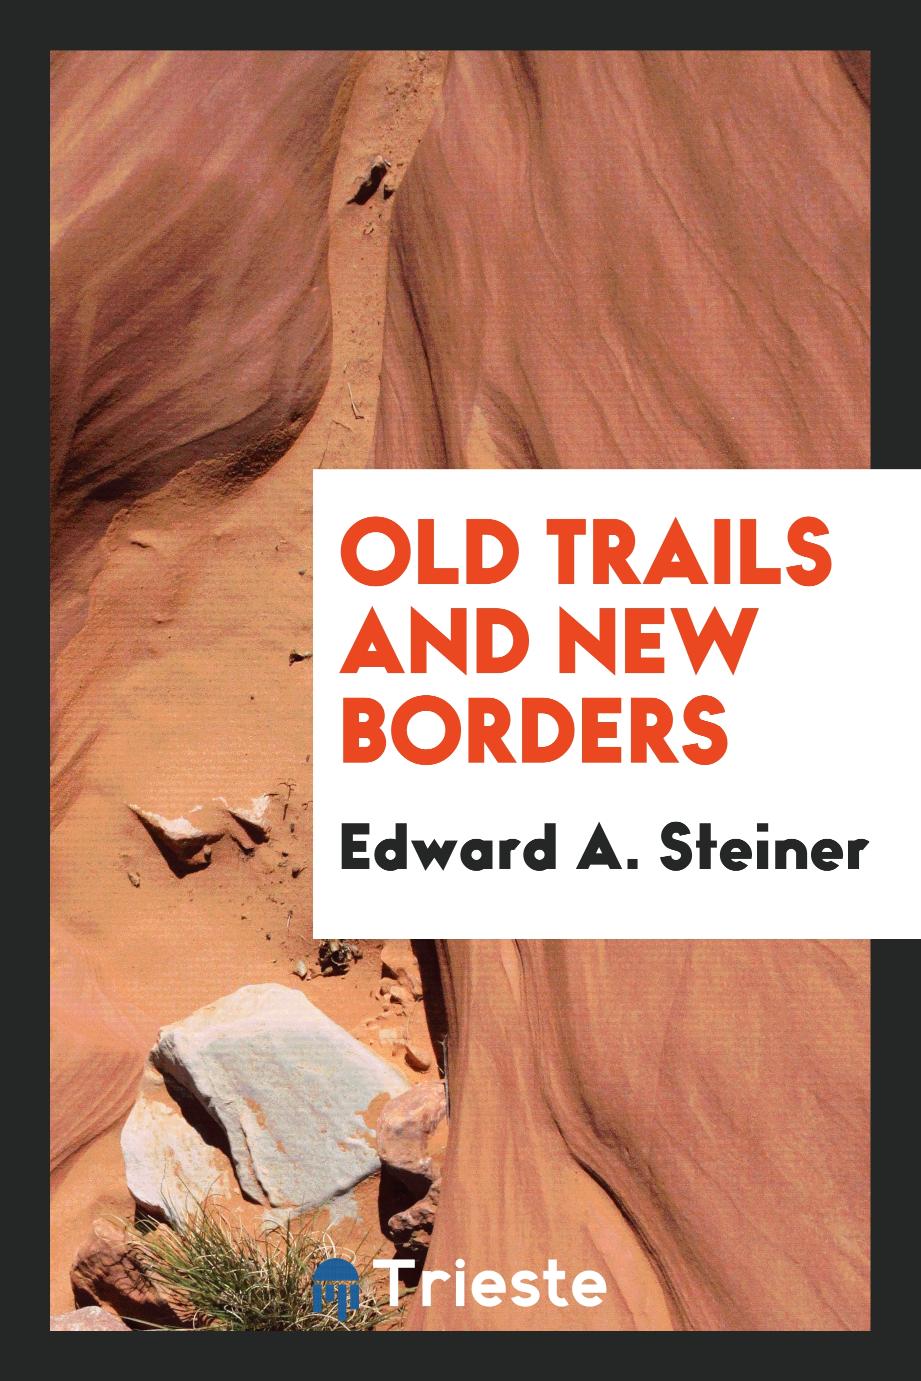 Old trails and new borders